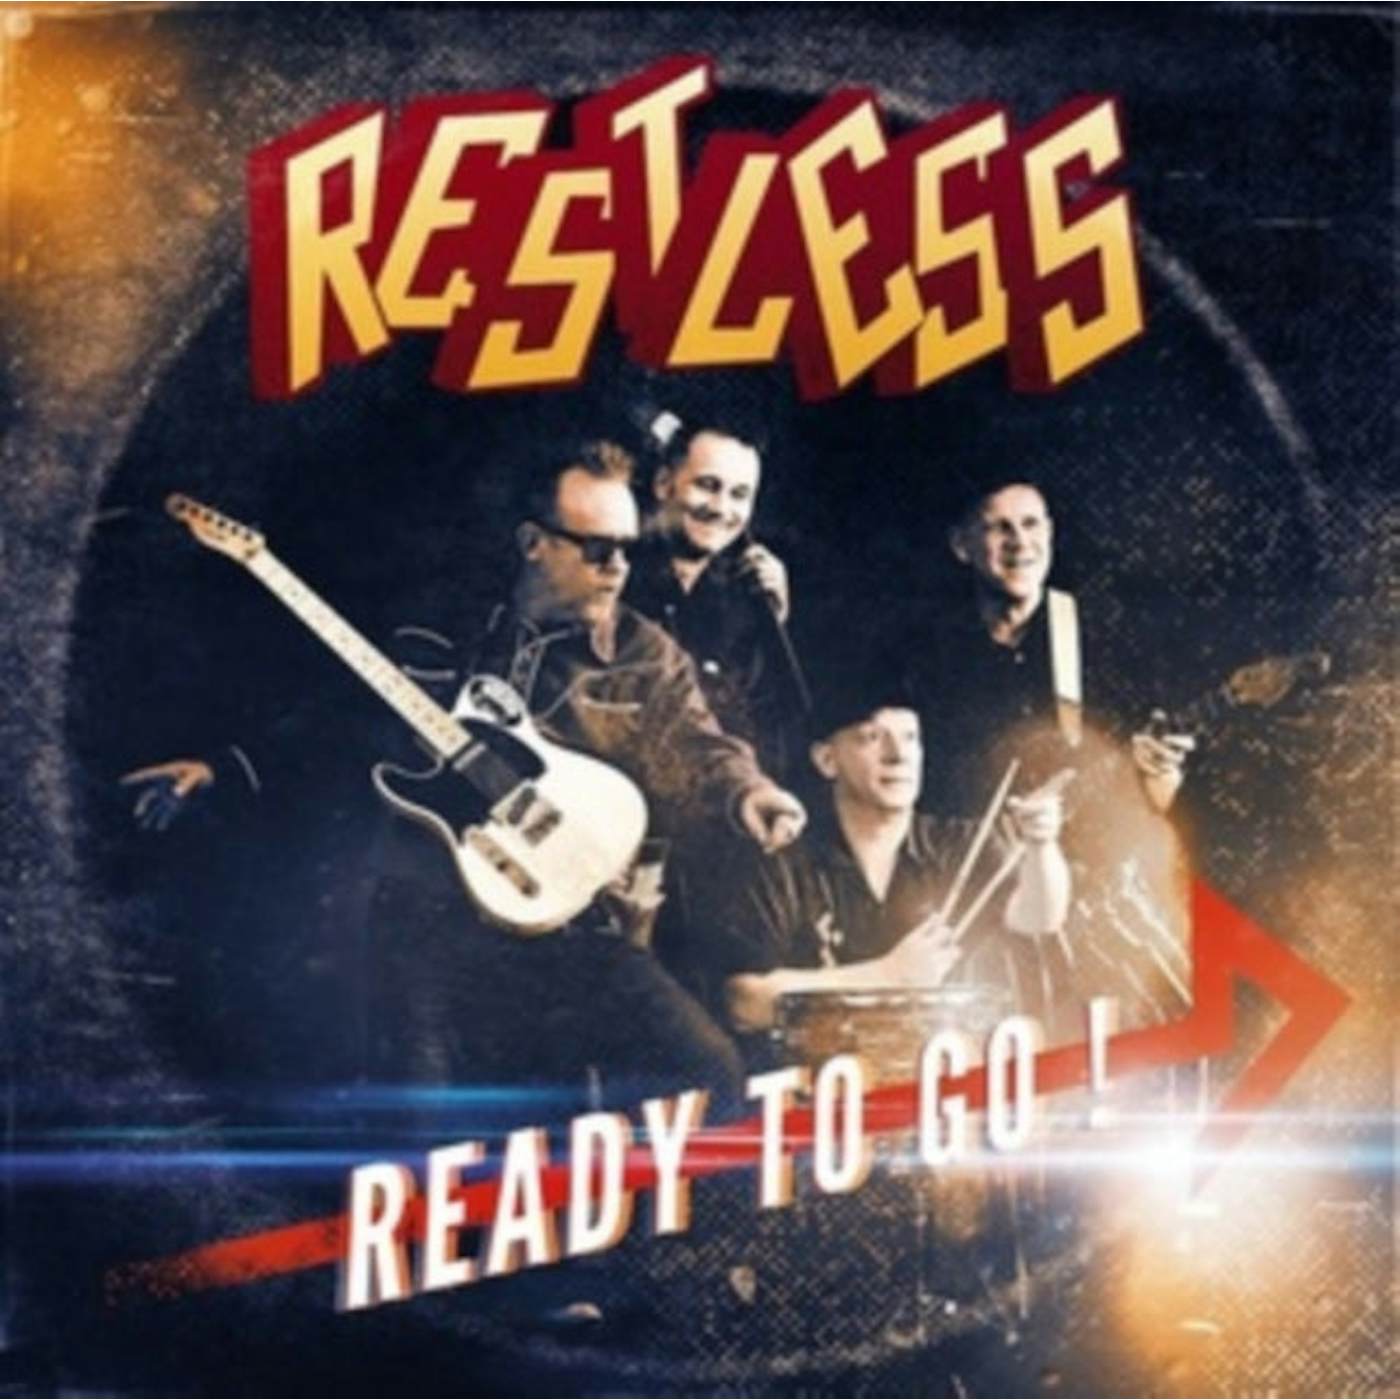 Restless CD - Ready To Go!